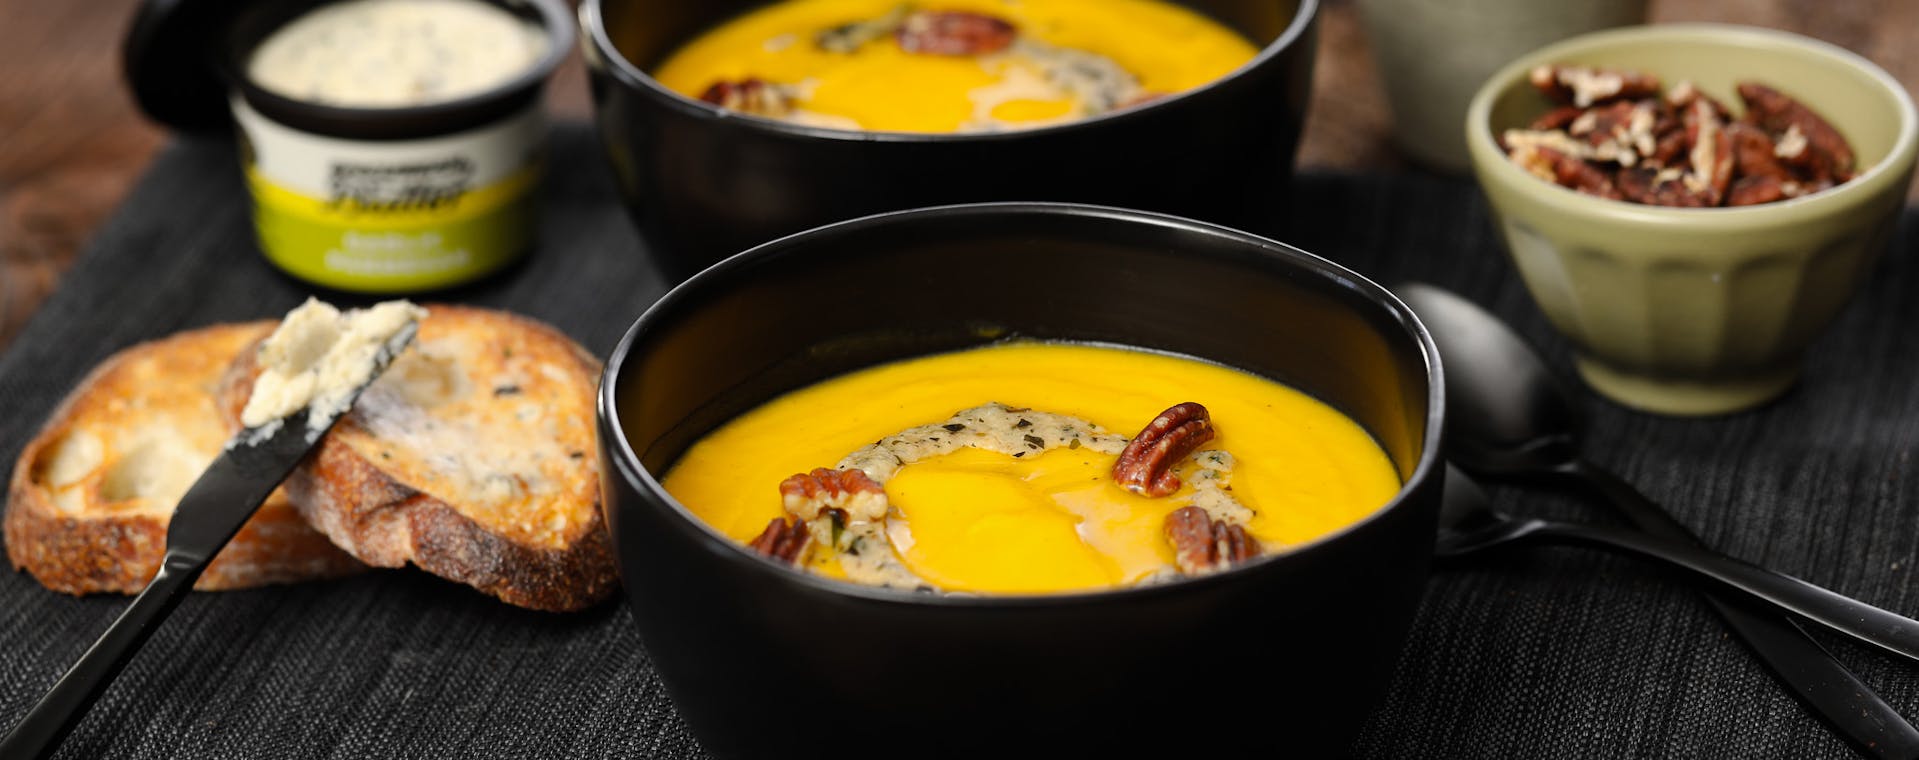 Butternut Squash Bisque made with Epicurean Butter Garlic Parmesan Flavored Butter